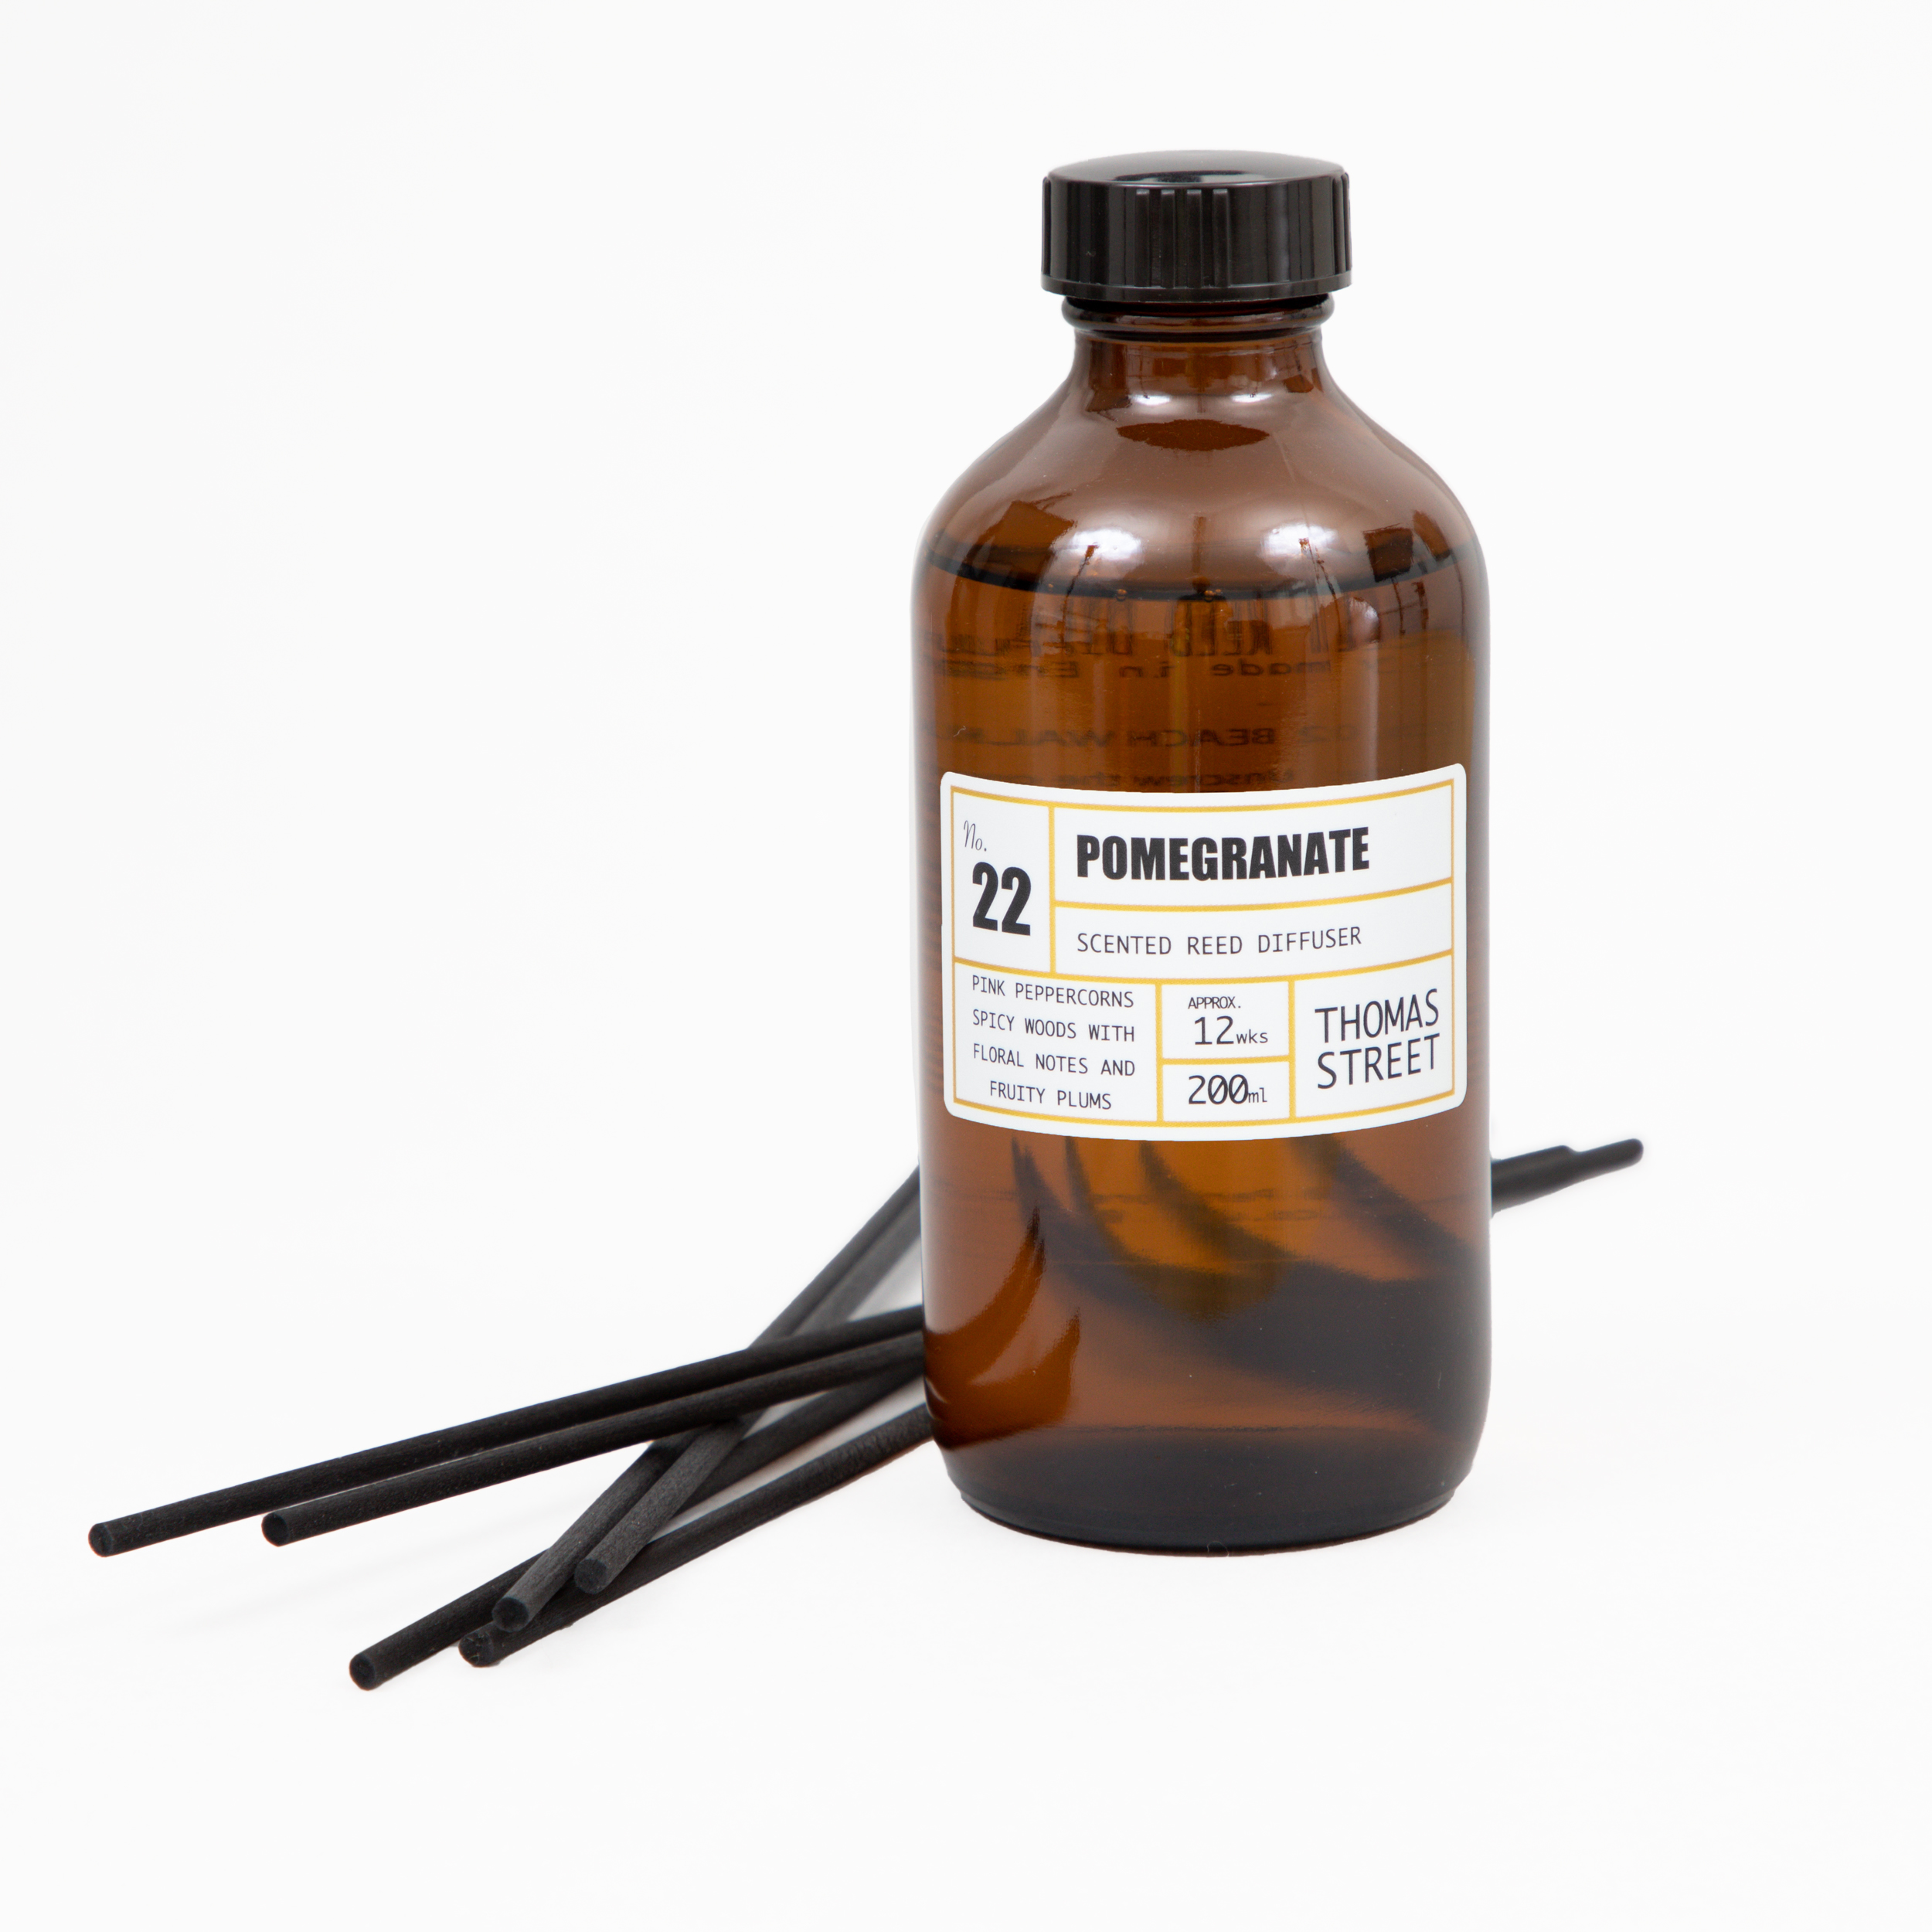 THOMAS STREET CANDLES #22 Pomegranate Reed Diffuser (200ml)